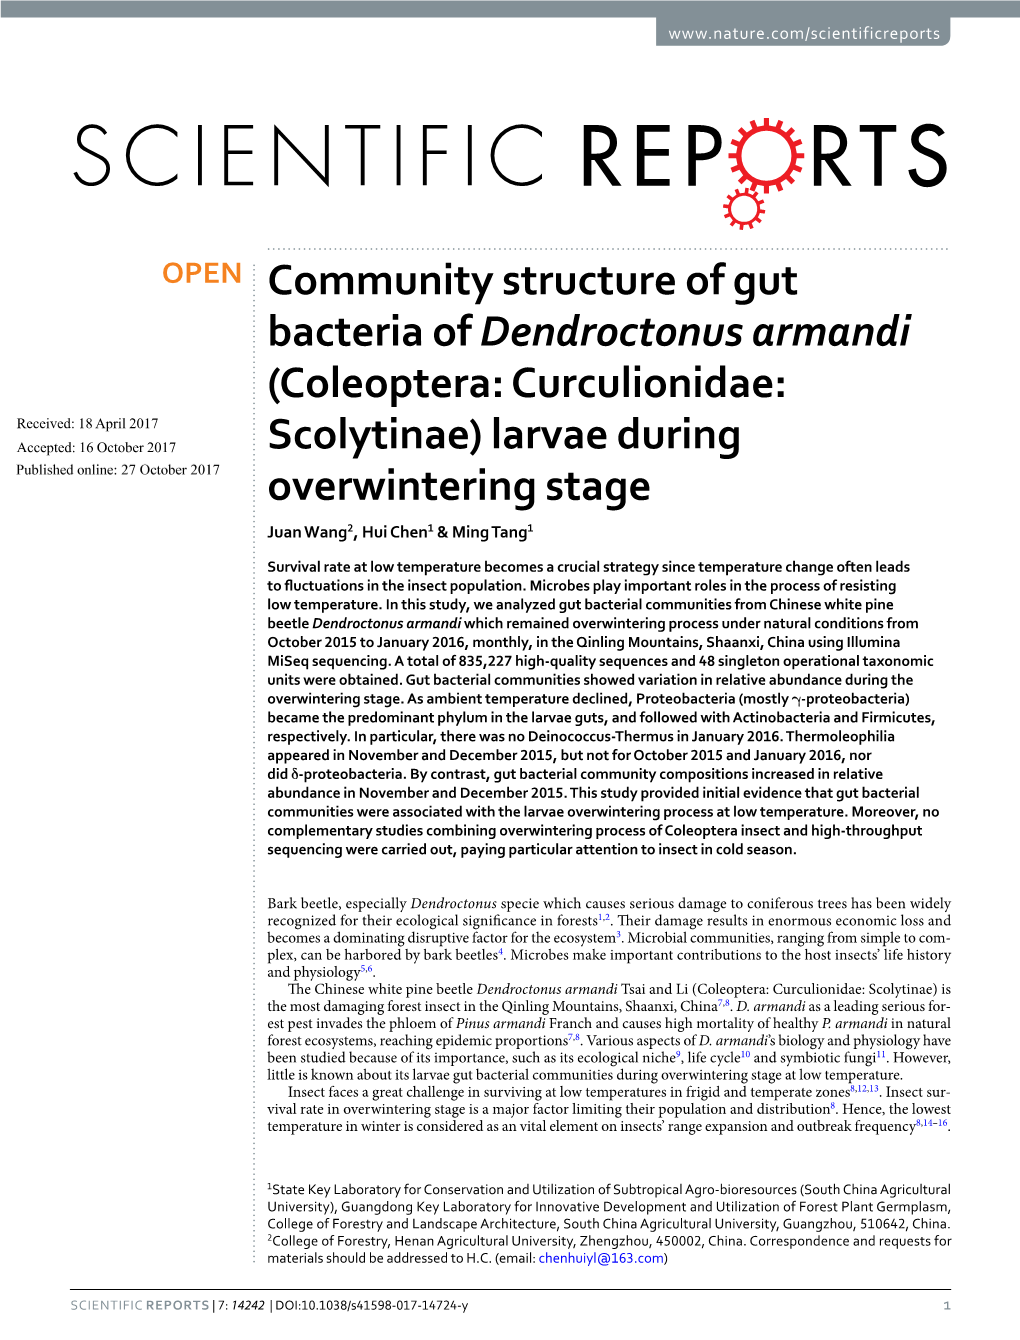 Community Structure of Gut Bacteria of Dendroctonus